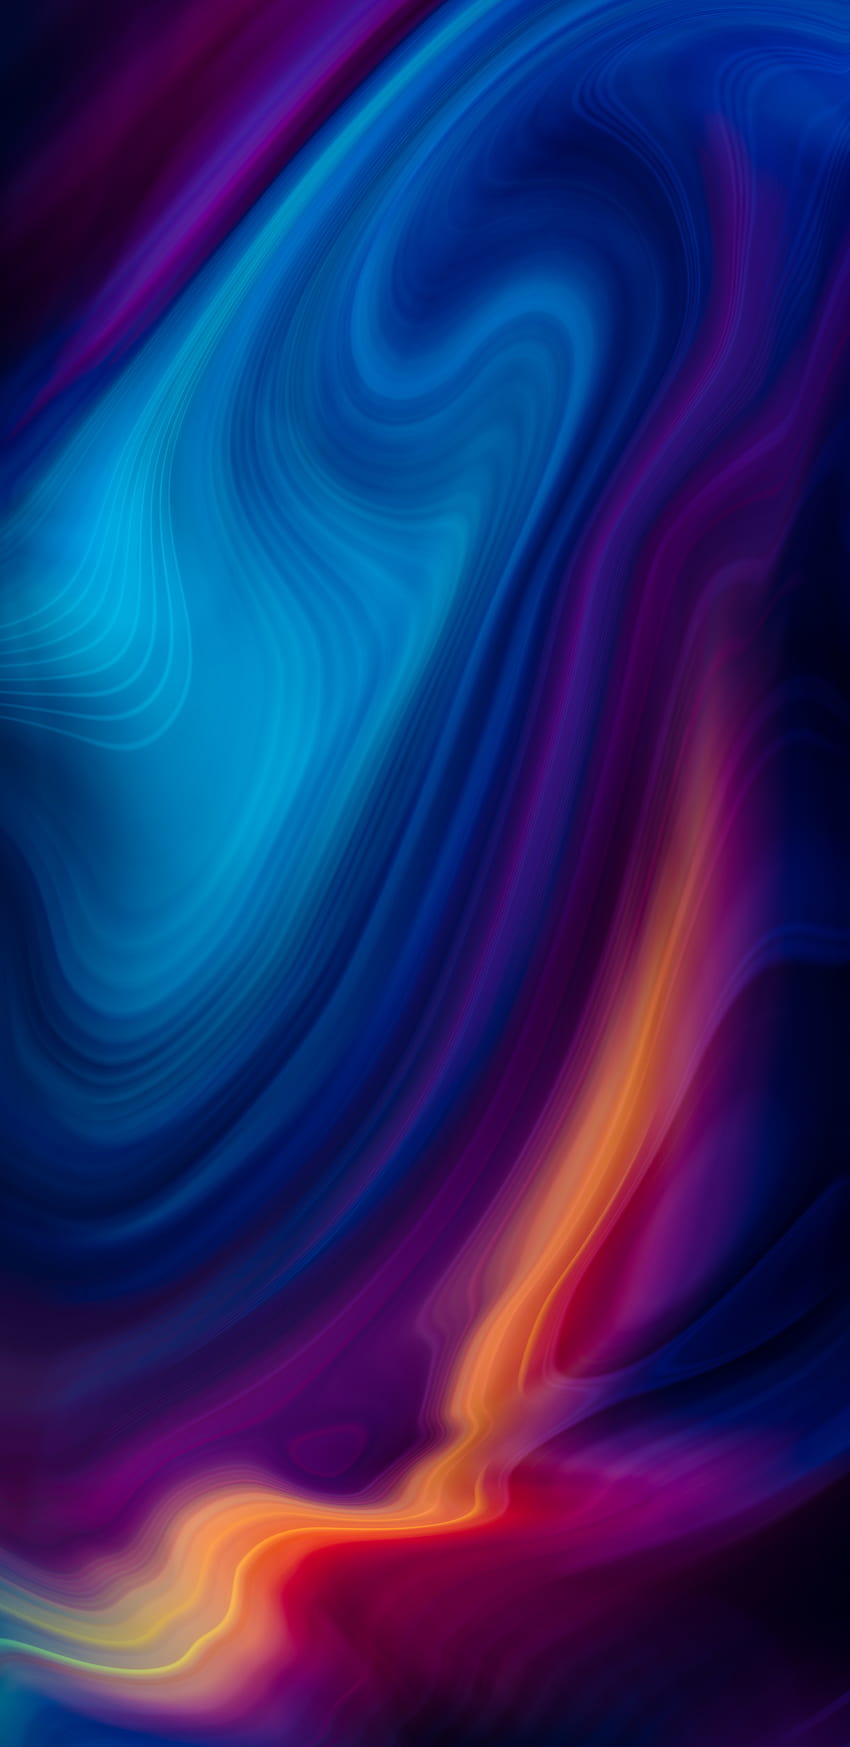 1440x2960 Mixed Colors Abstract Samsung Galaxy Note 9,8, S9,S8,S Q , Backgrounds, and, android full color HD phone wallpaper